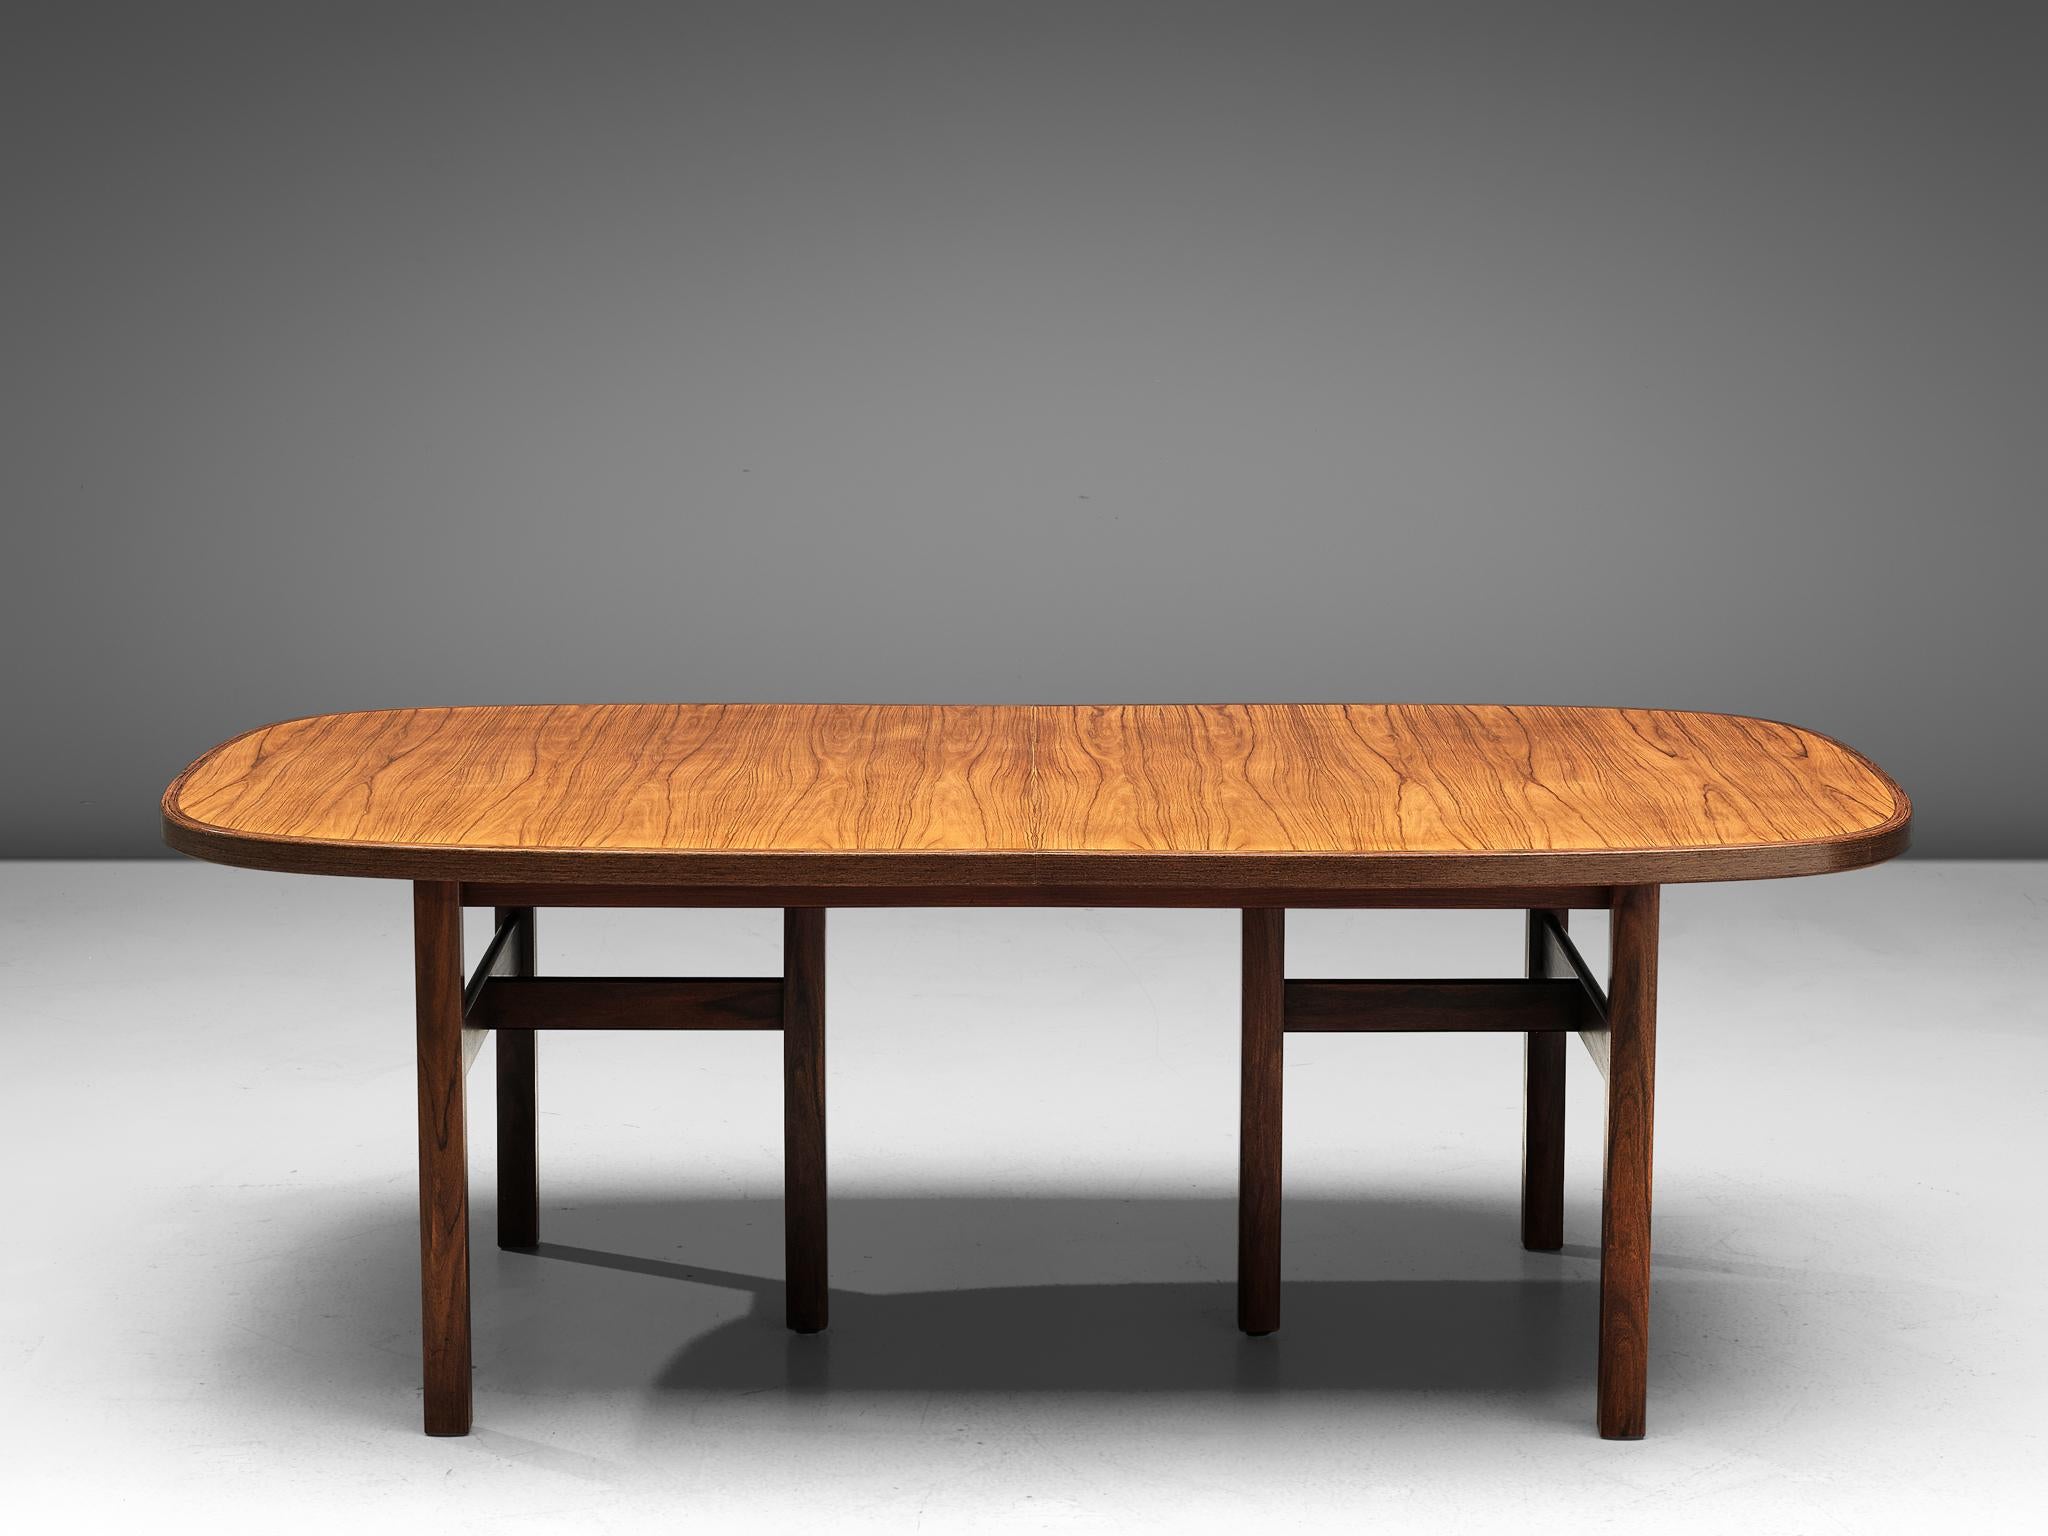 Arne Vodder for Sibast Møbler, dining table, rosewood, Denmark, 1950s.

Well-designed rosewood dining table with a squared oval top. This table has characteristic legs typical for Vodder's design. Both side show three legs in a triangle shape